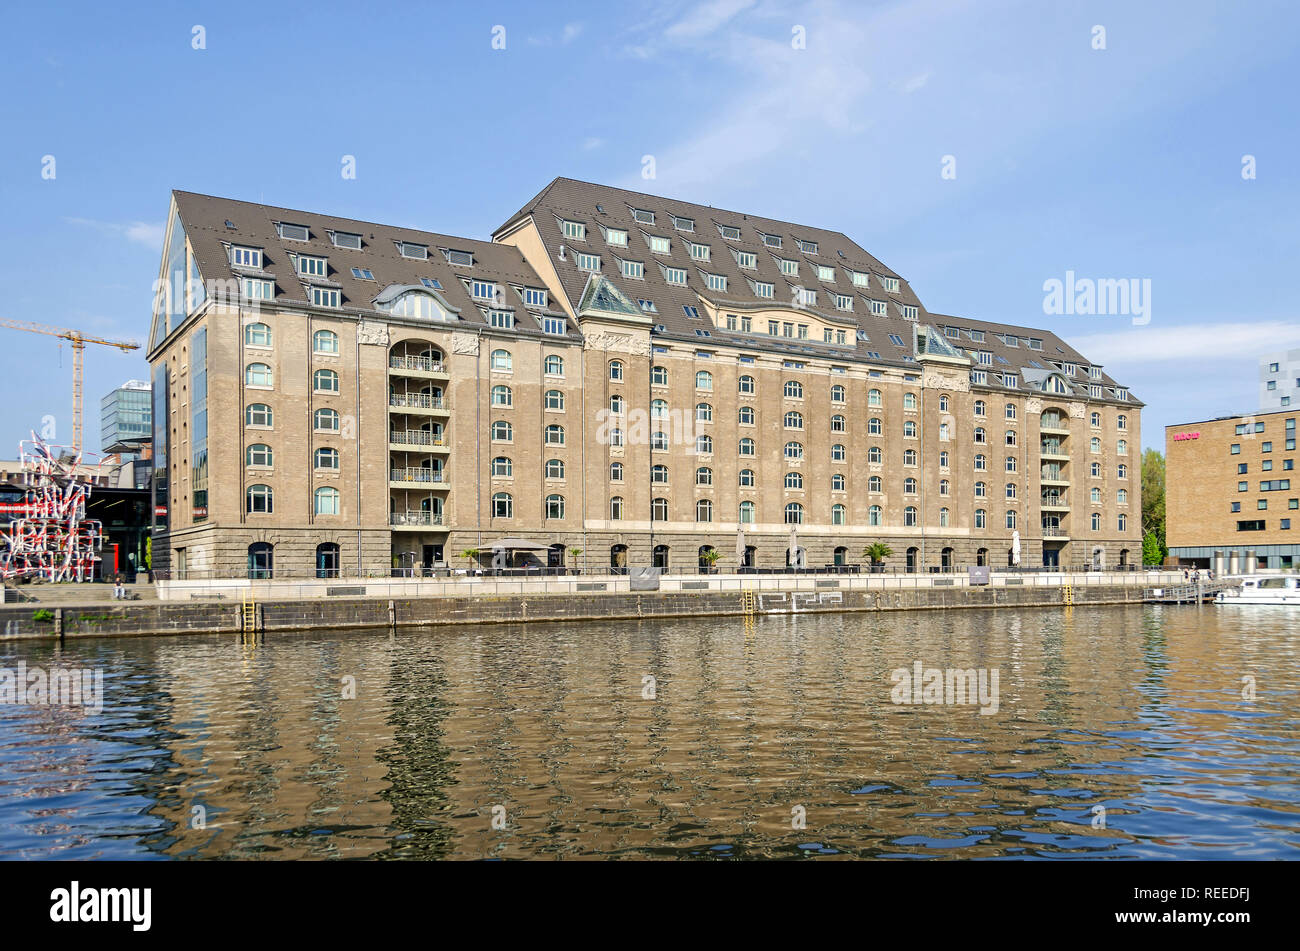 Berlin, Germany - April 22, 2018: Spreespeicher - the event location right in the center of the creative media district on a banks of the river Spree  Stock Photo